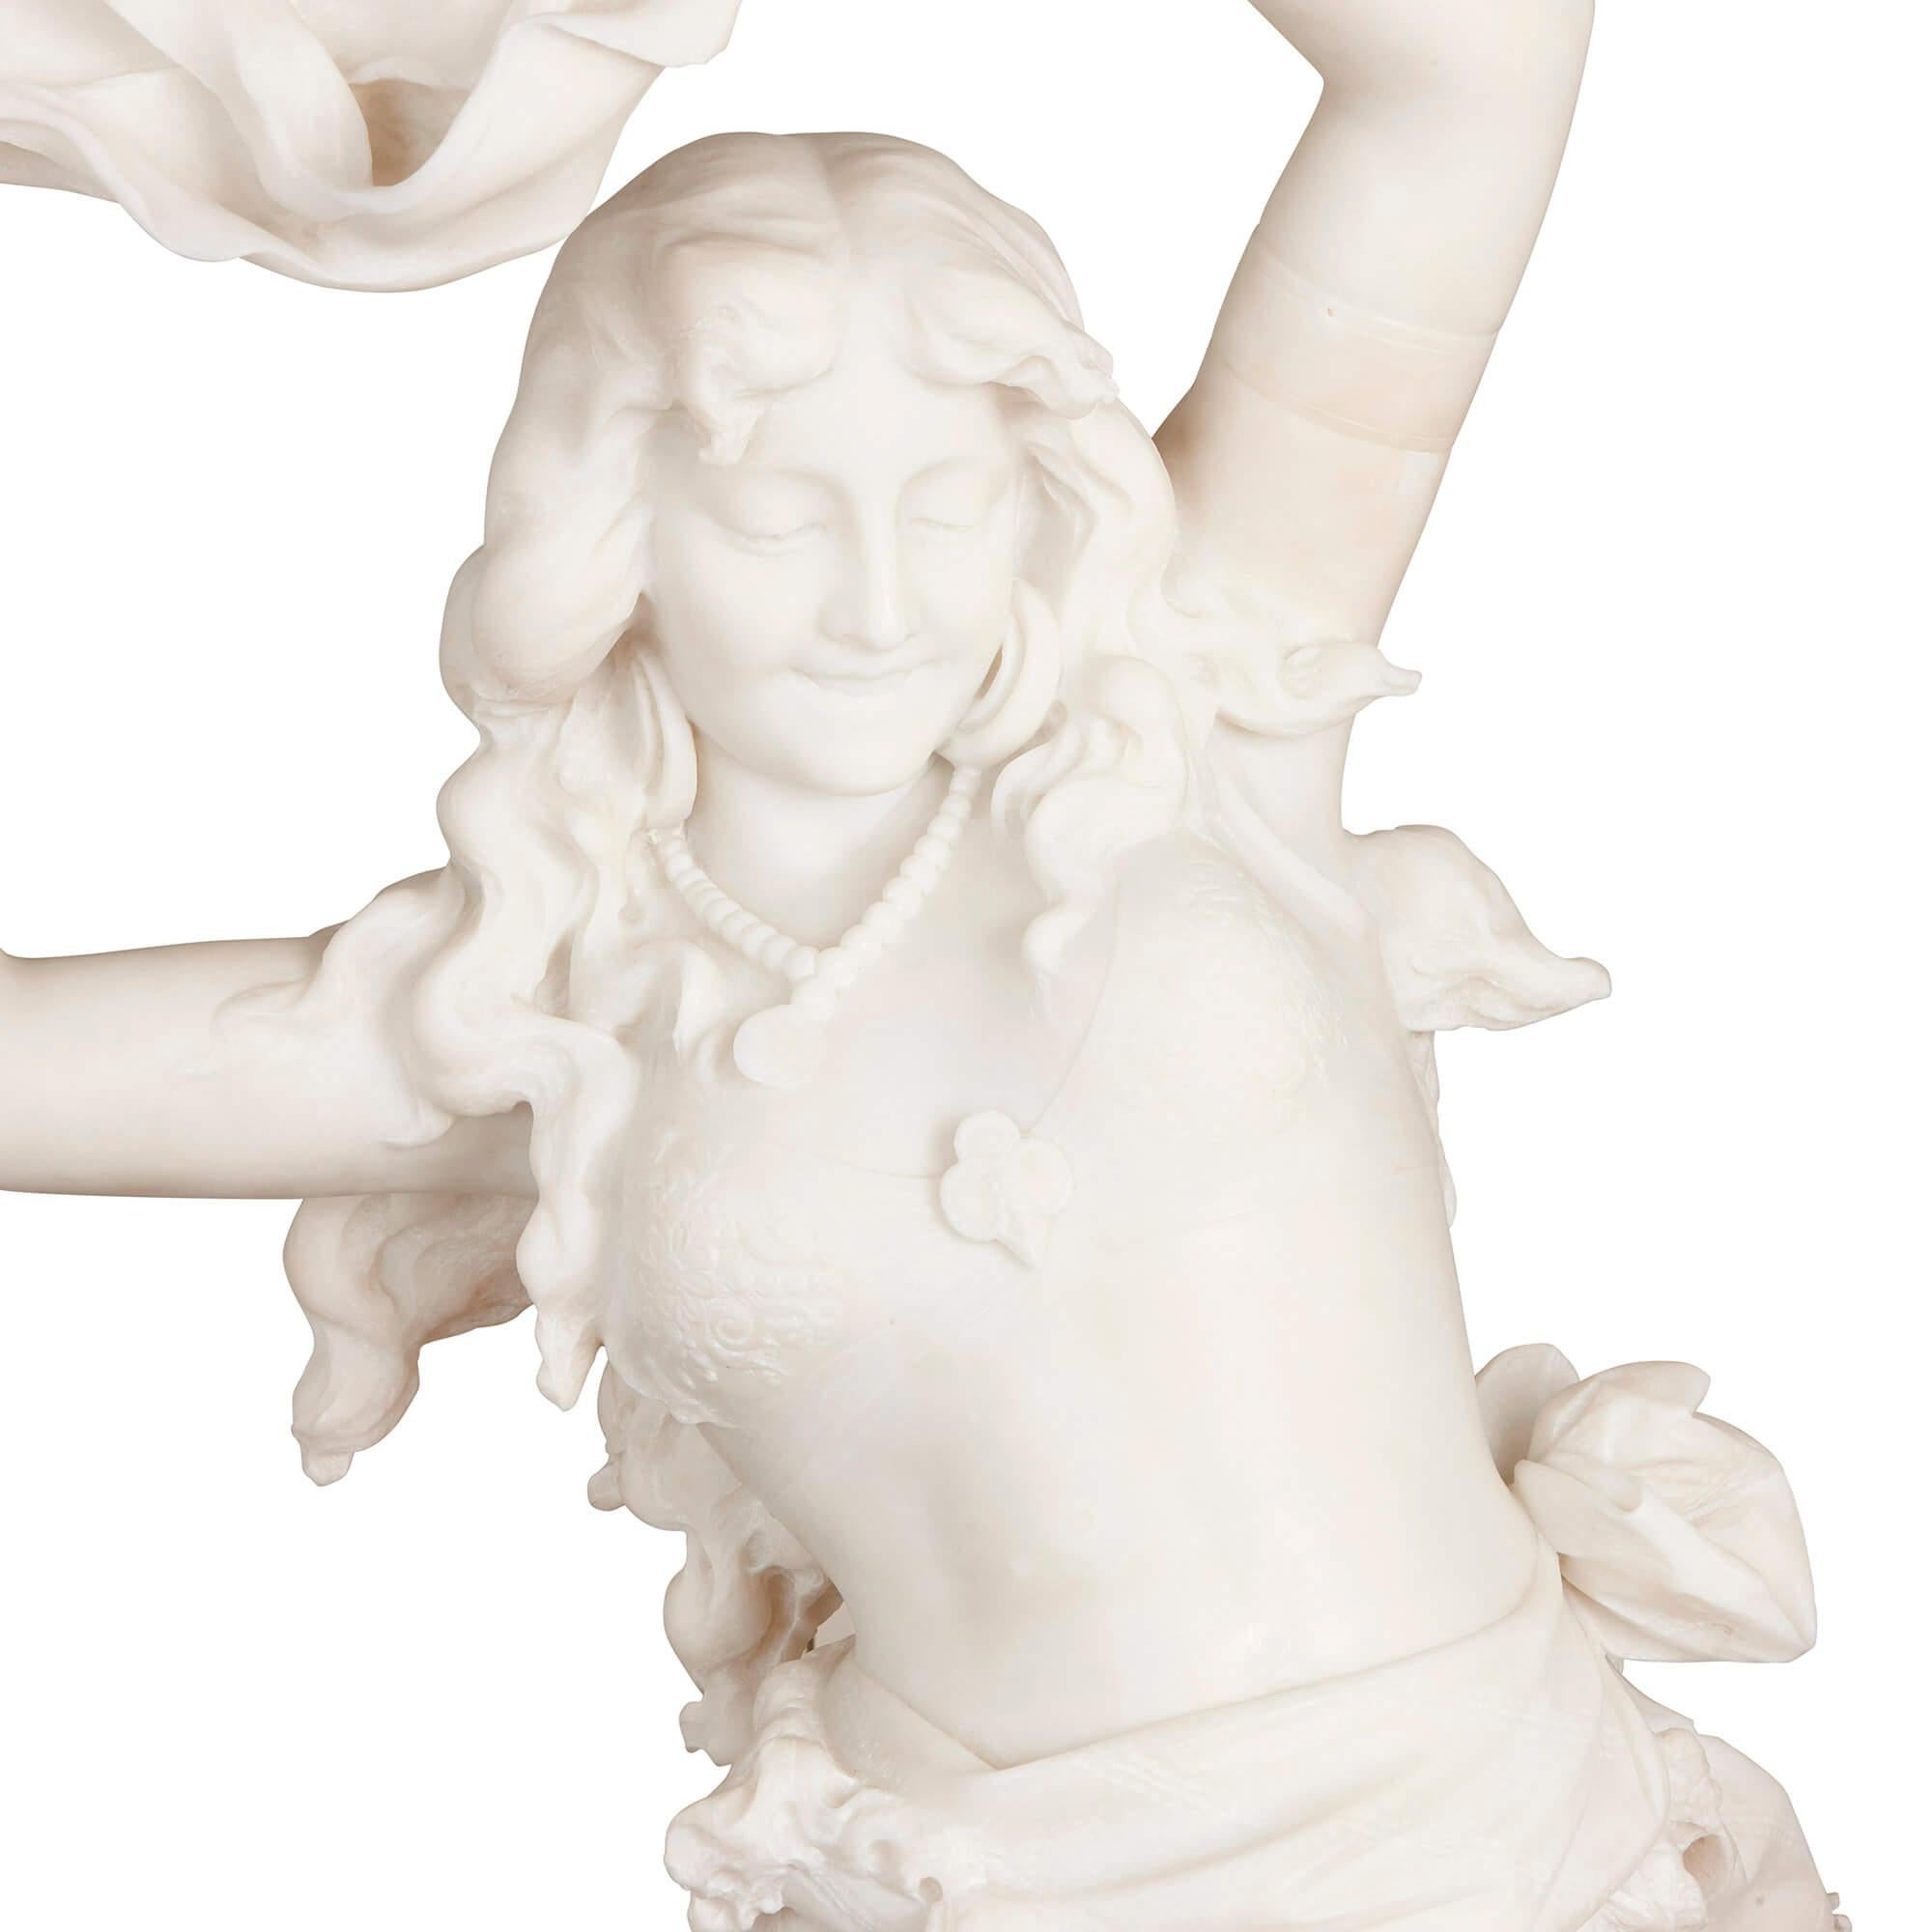 Romantic Marble Sculpture by Vichi, 'Exotic Dancer', for 1914, French Salon For Sale